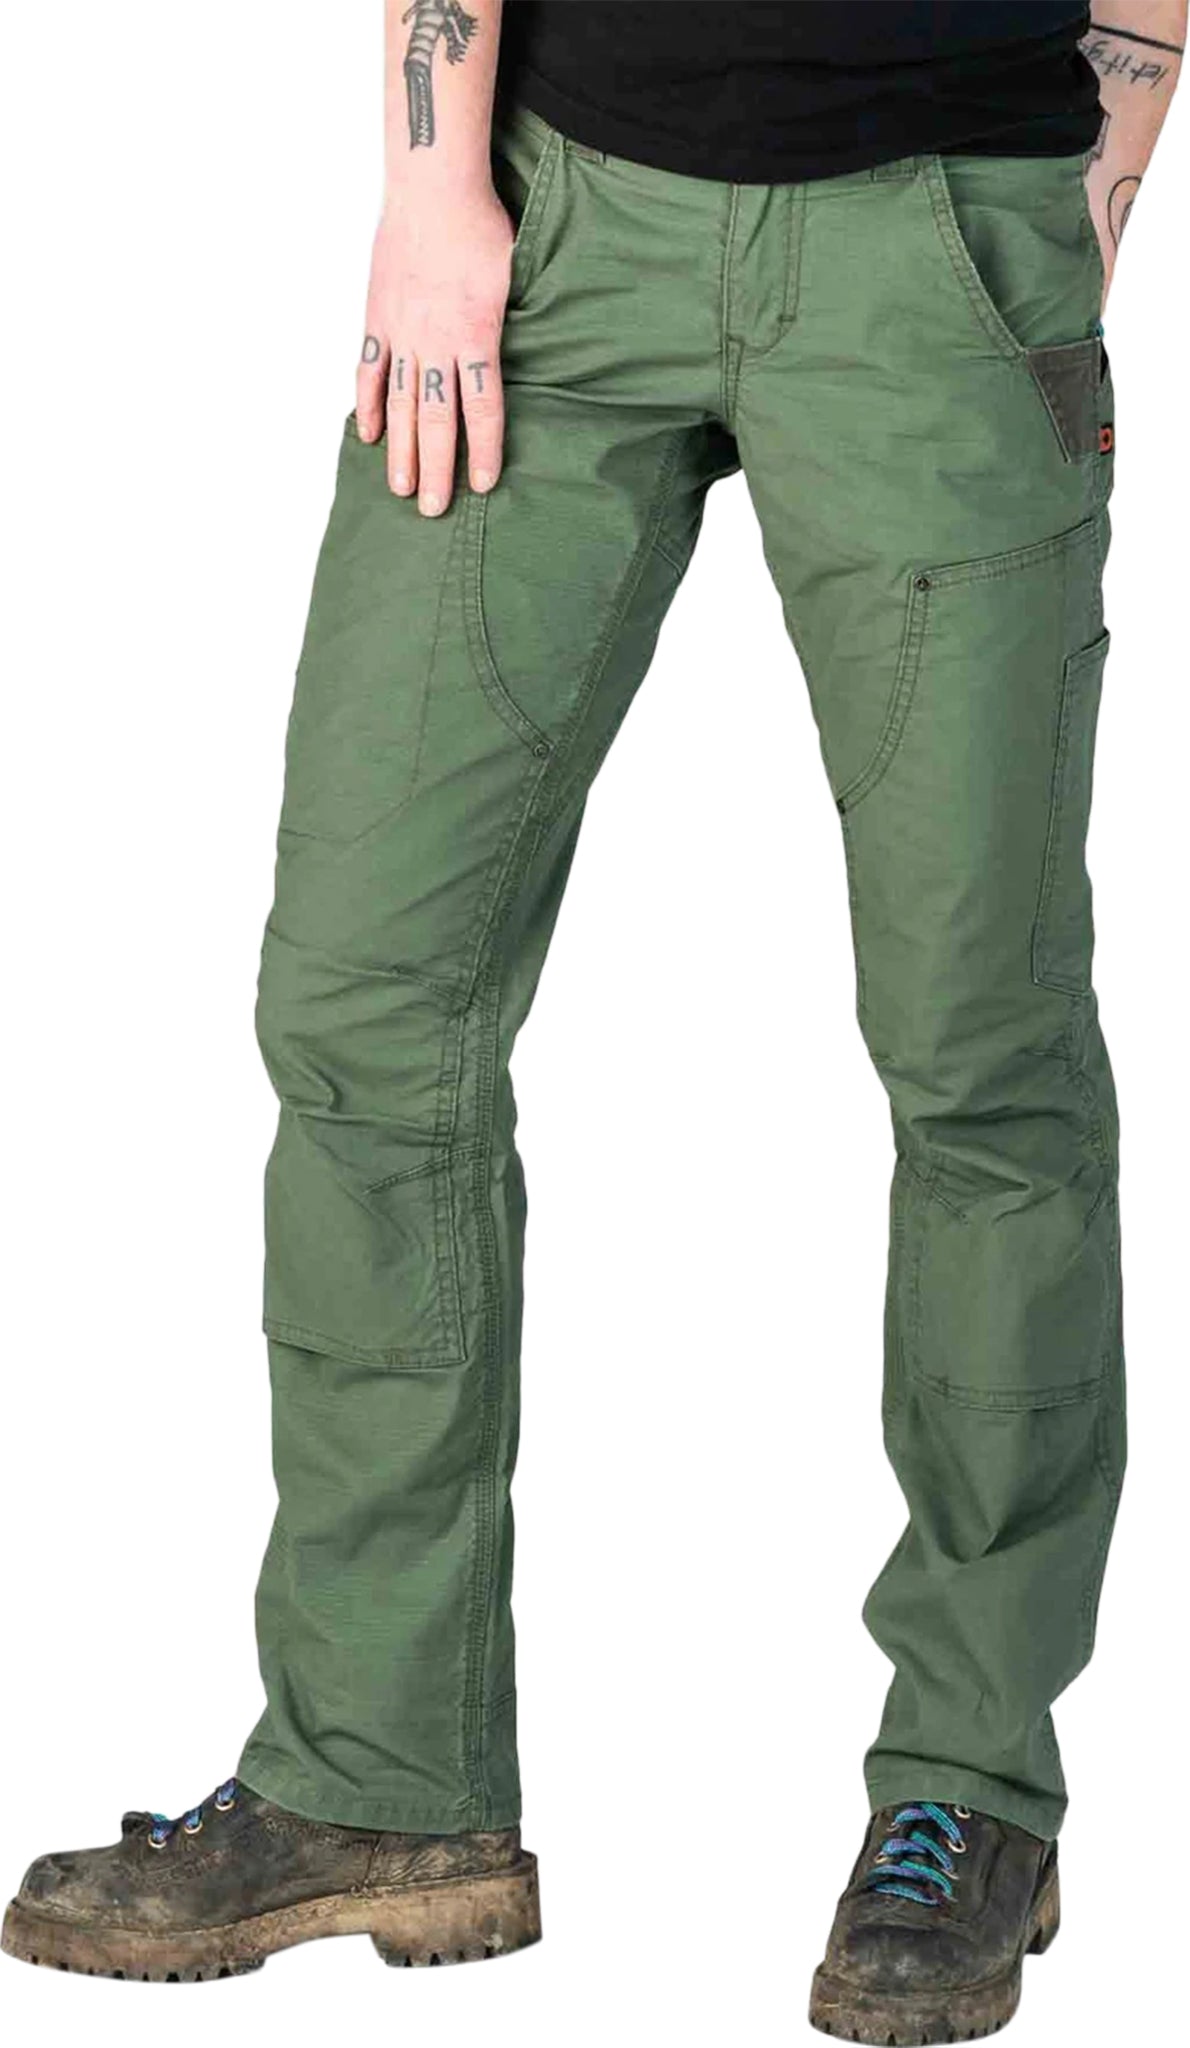 Fashion World Ladies Stretchable Cargo Jogger Pant for Gym and Jogging in  Light Army Green Trousers